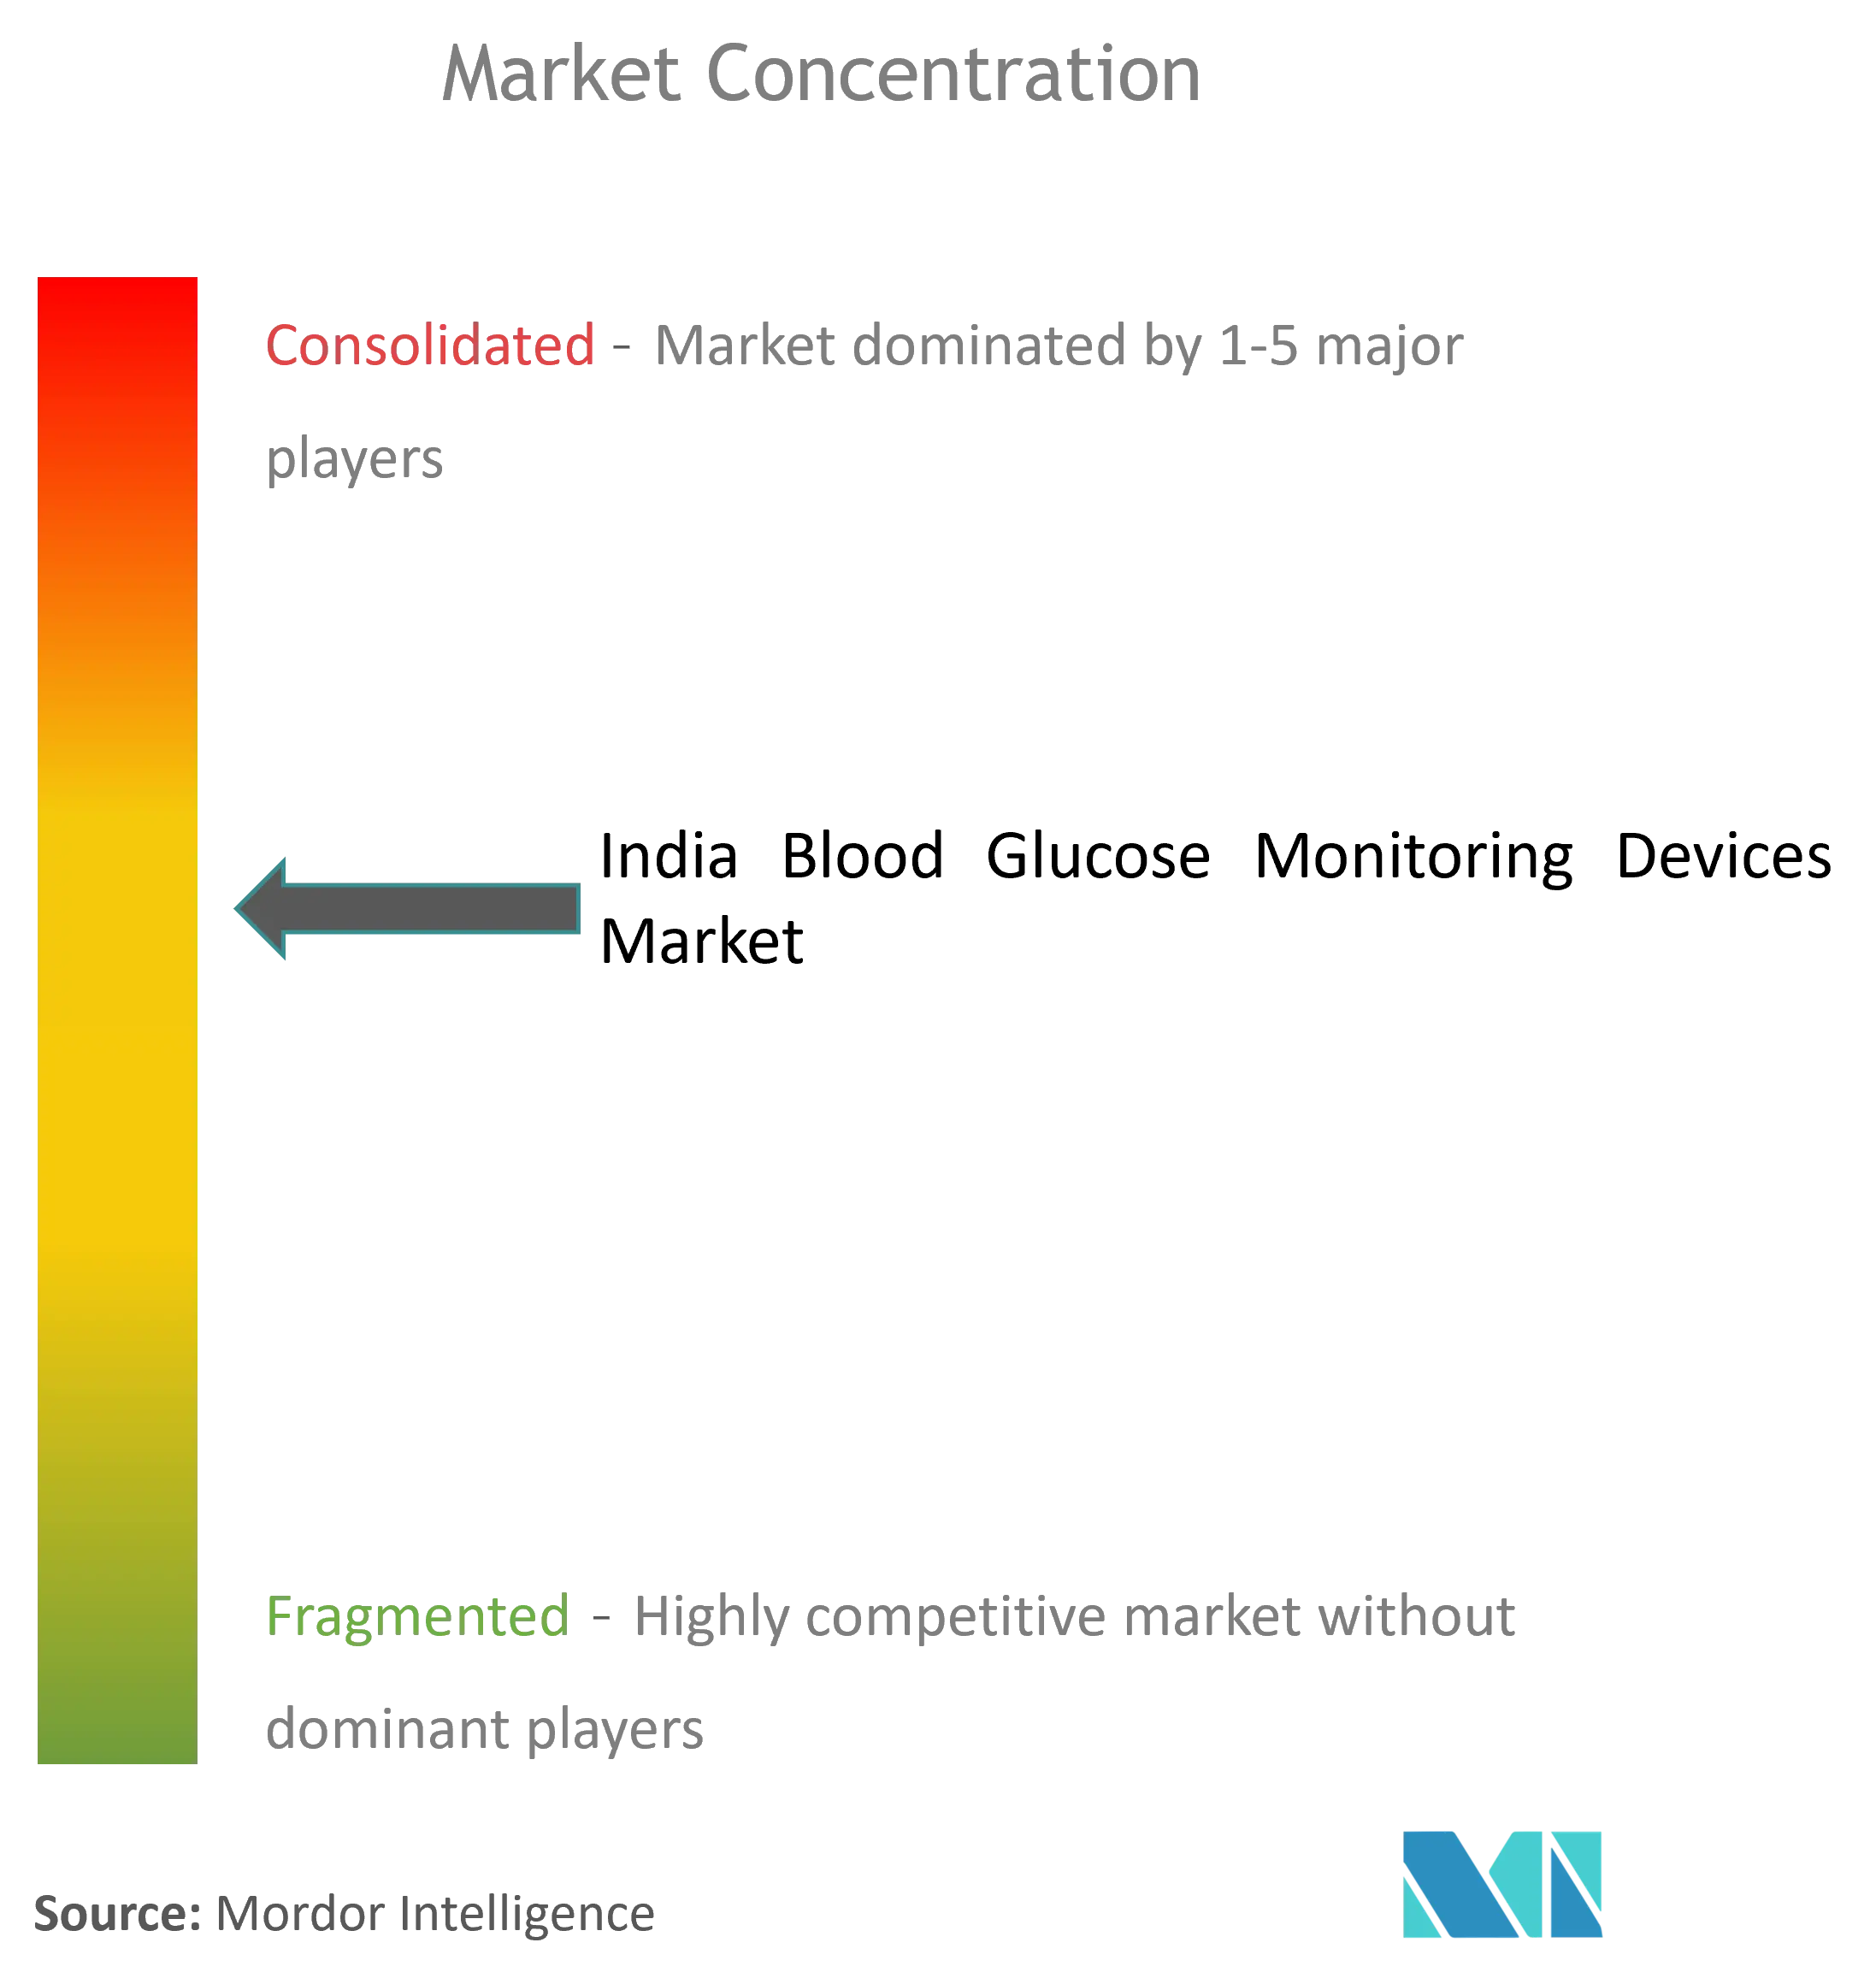 India Blood Glucose Monitoring Market Concentration